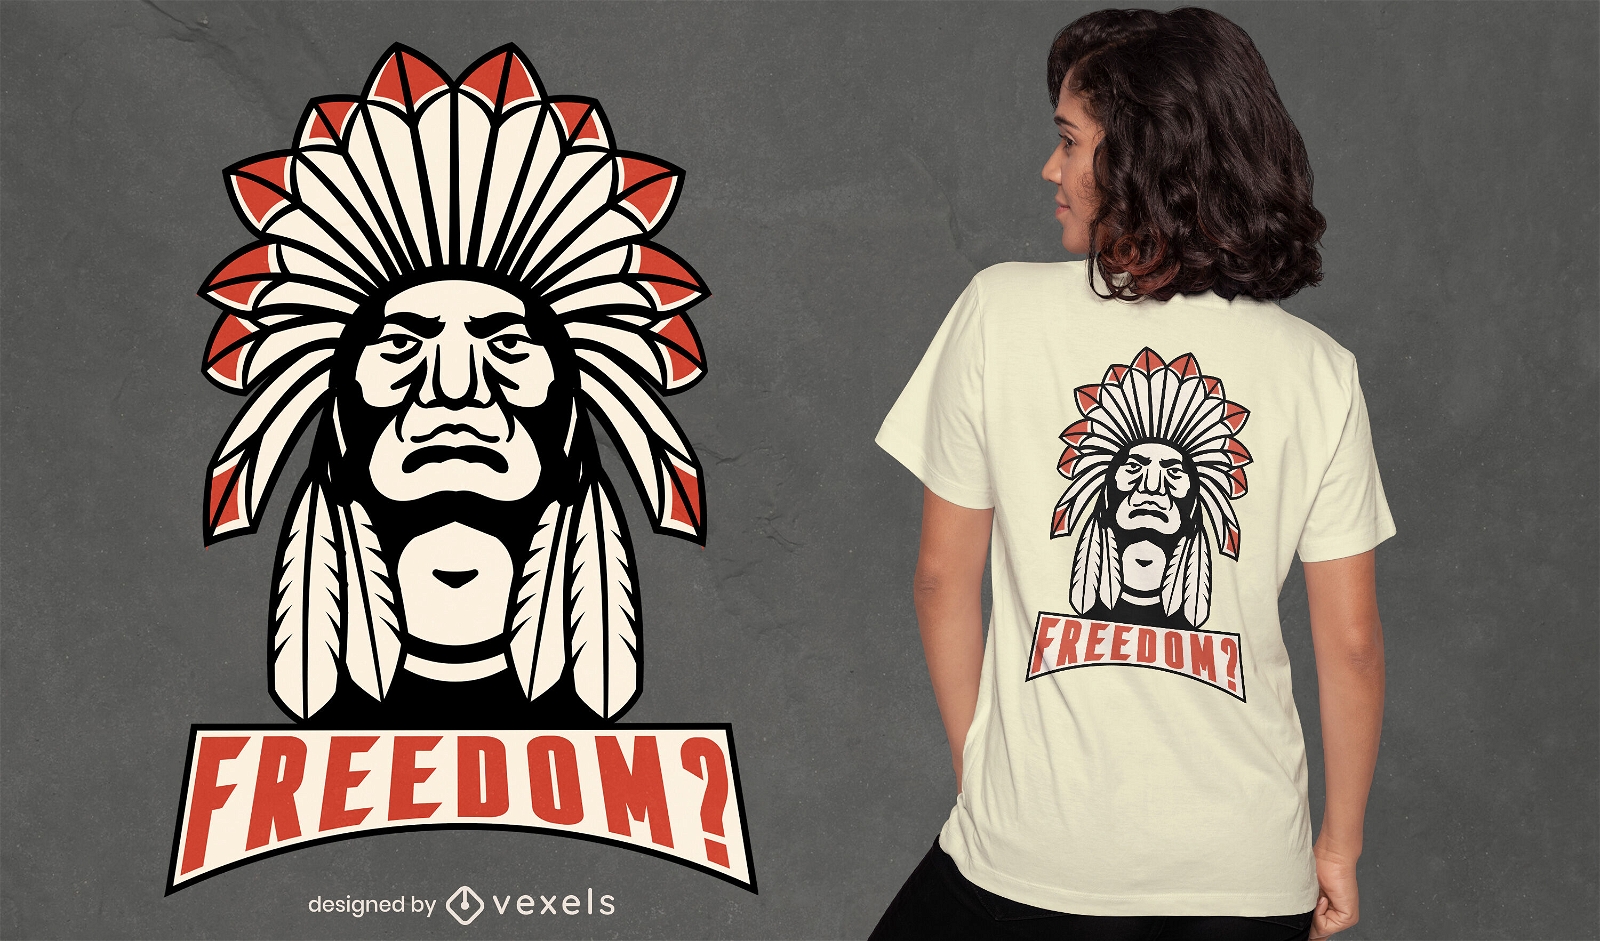 Native American freedom quote t-shirt design 